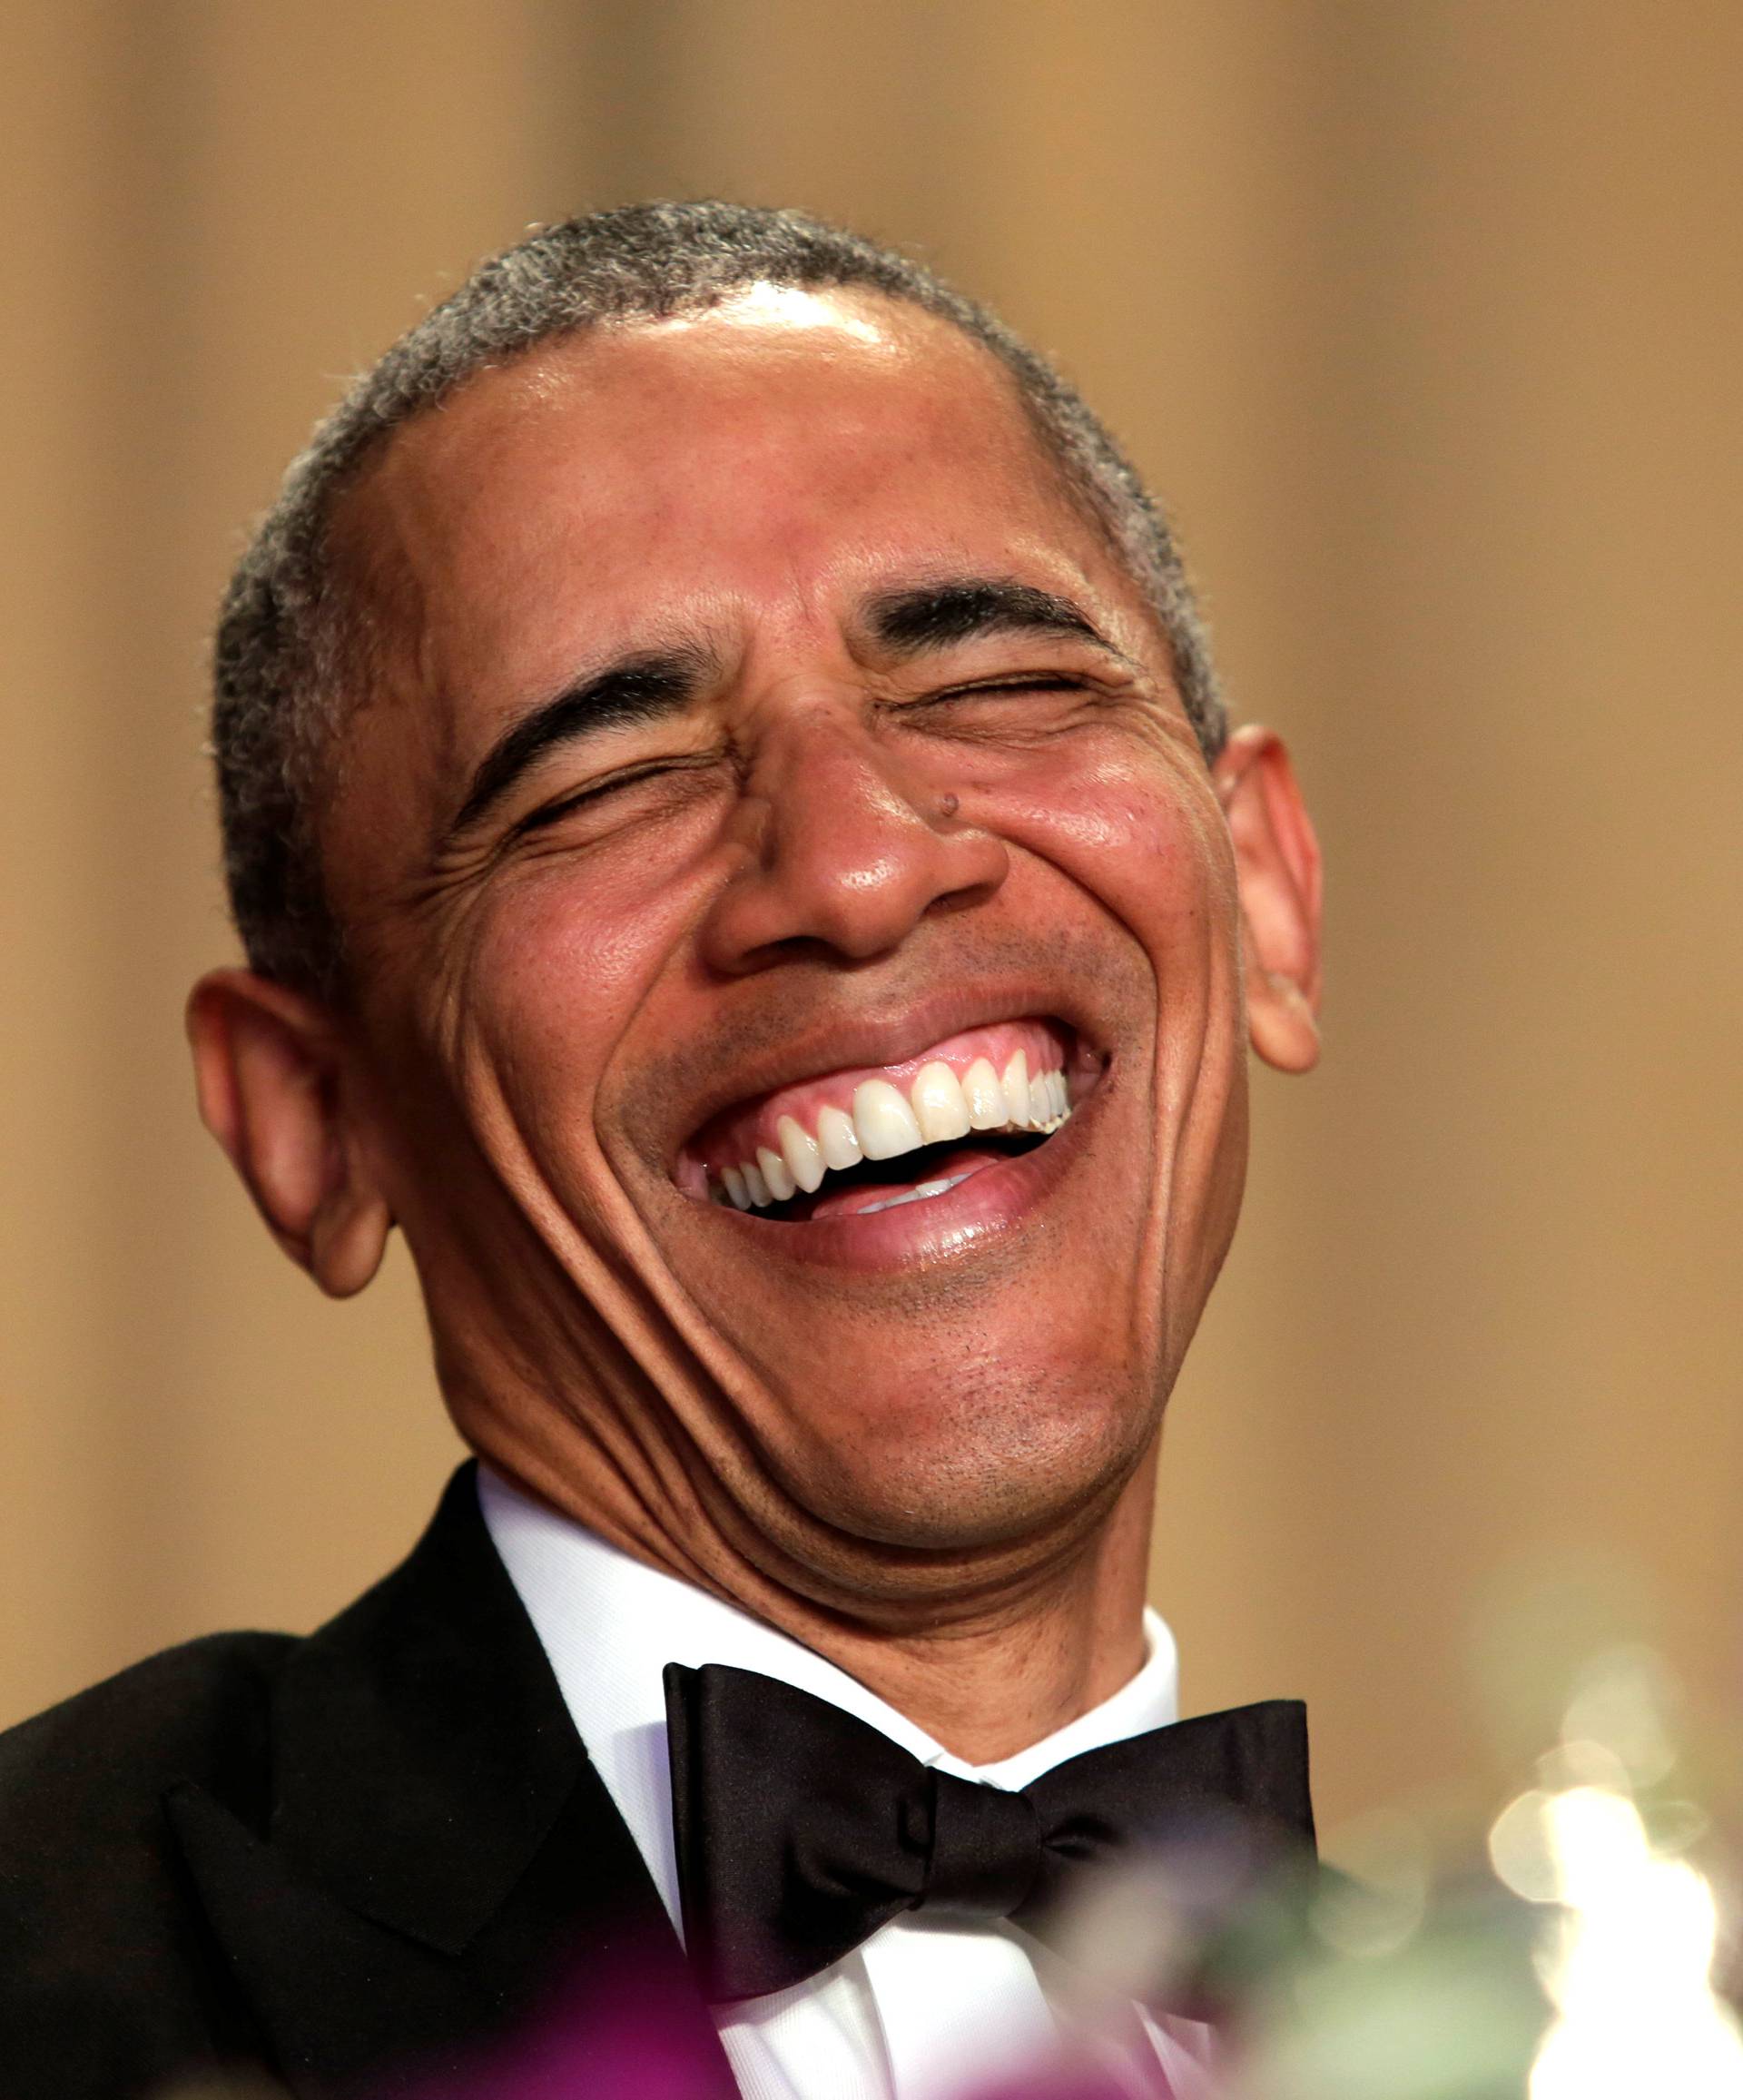 U.S. President Barack Obama laughts at the White House Correspondents' Association annual dinner in Washington